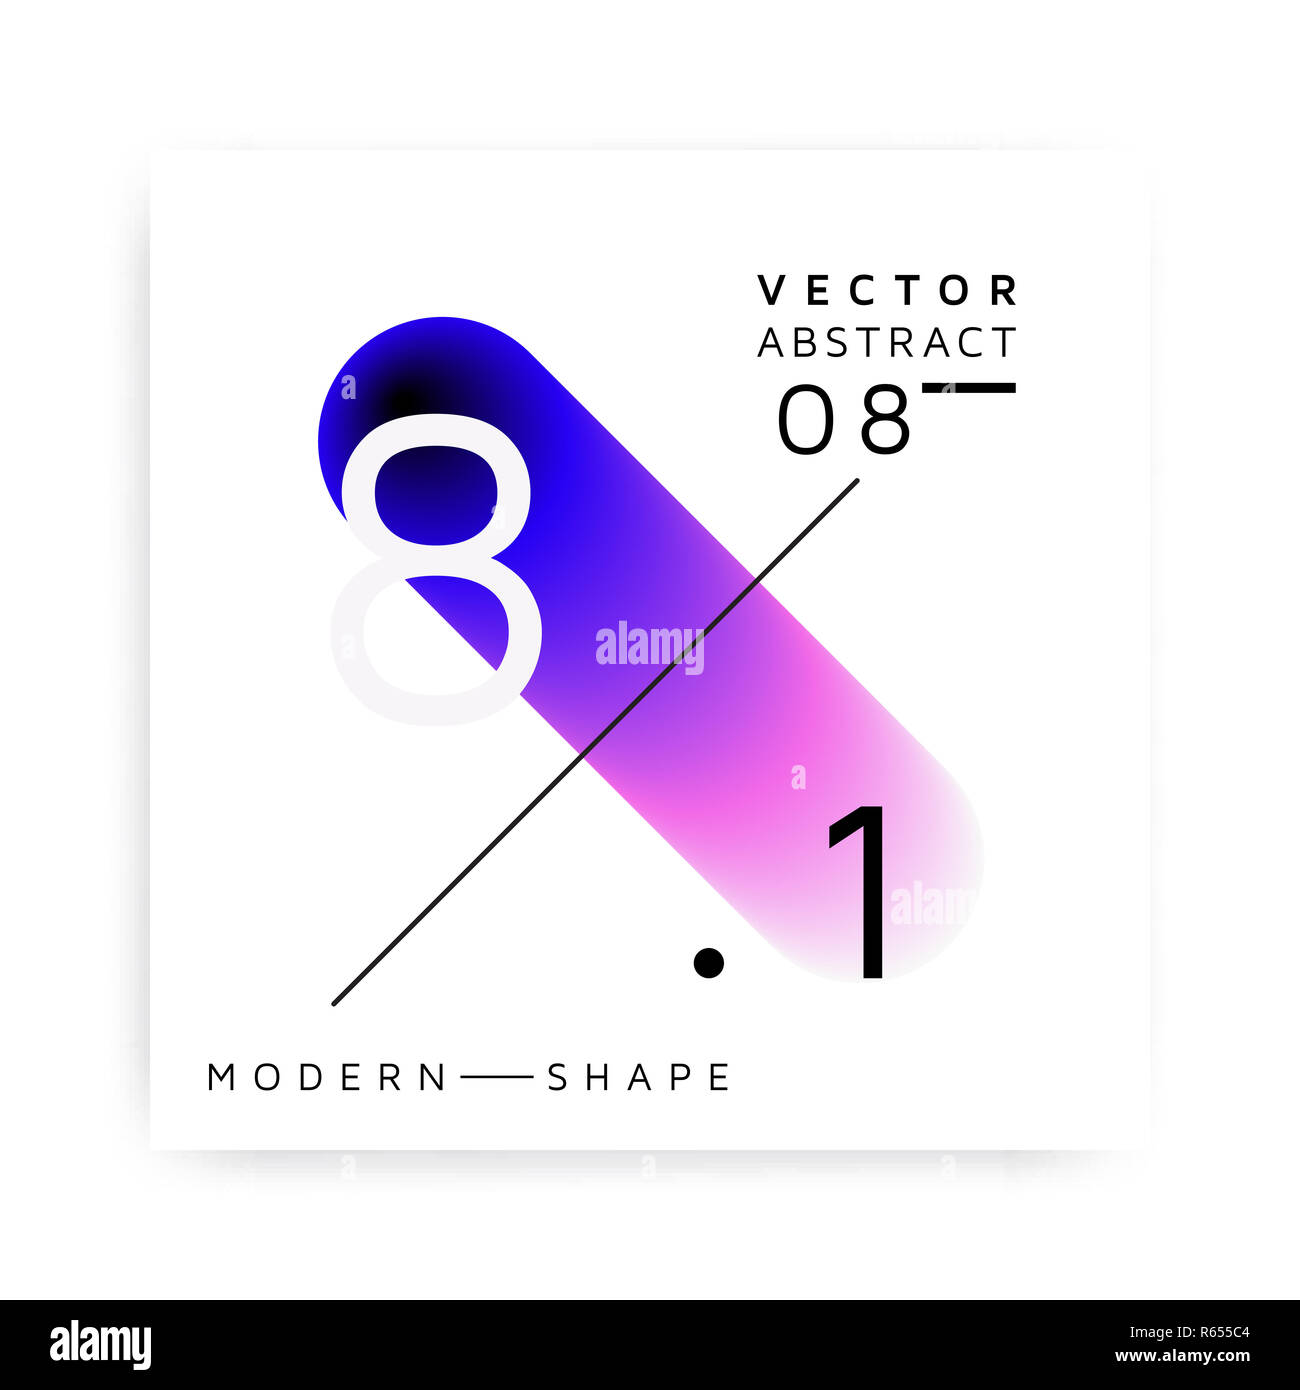 Abstract vector modern colorful shape Stock Photo